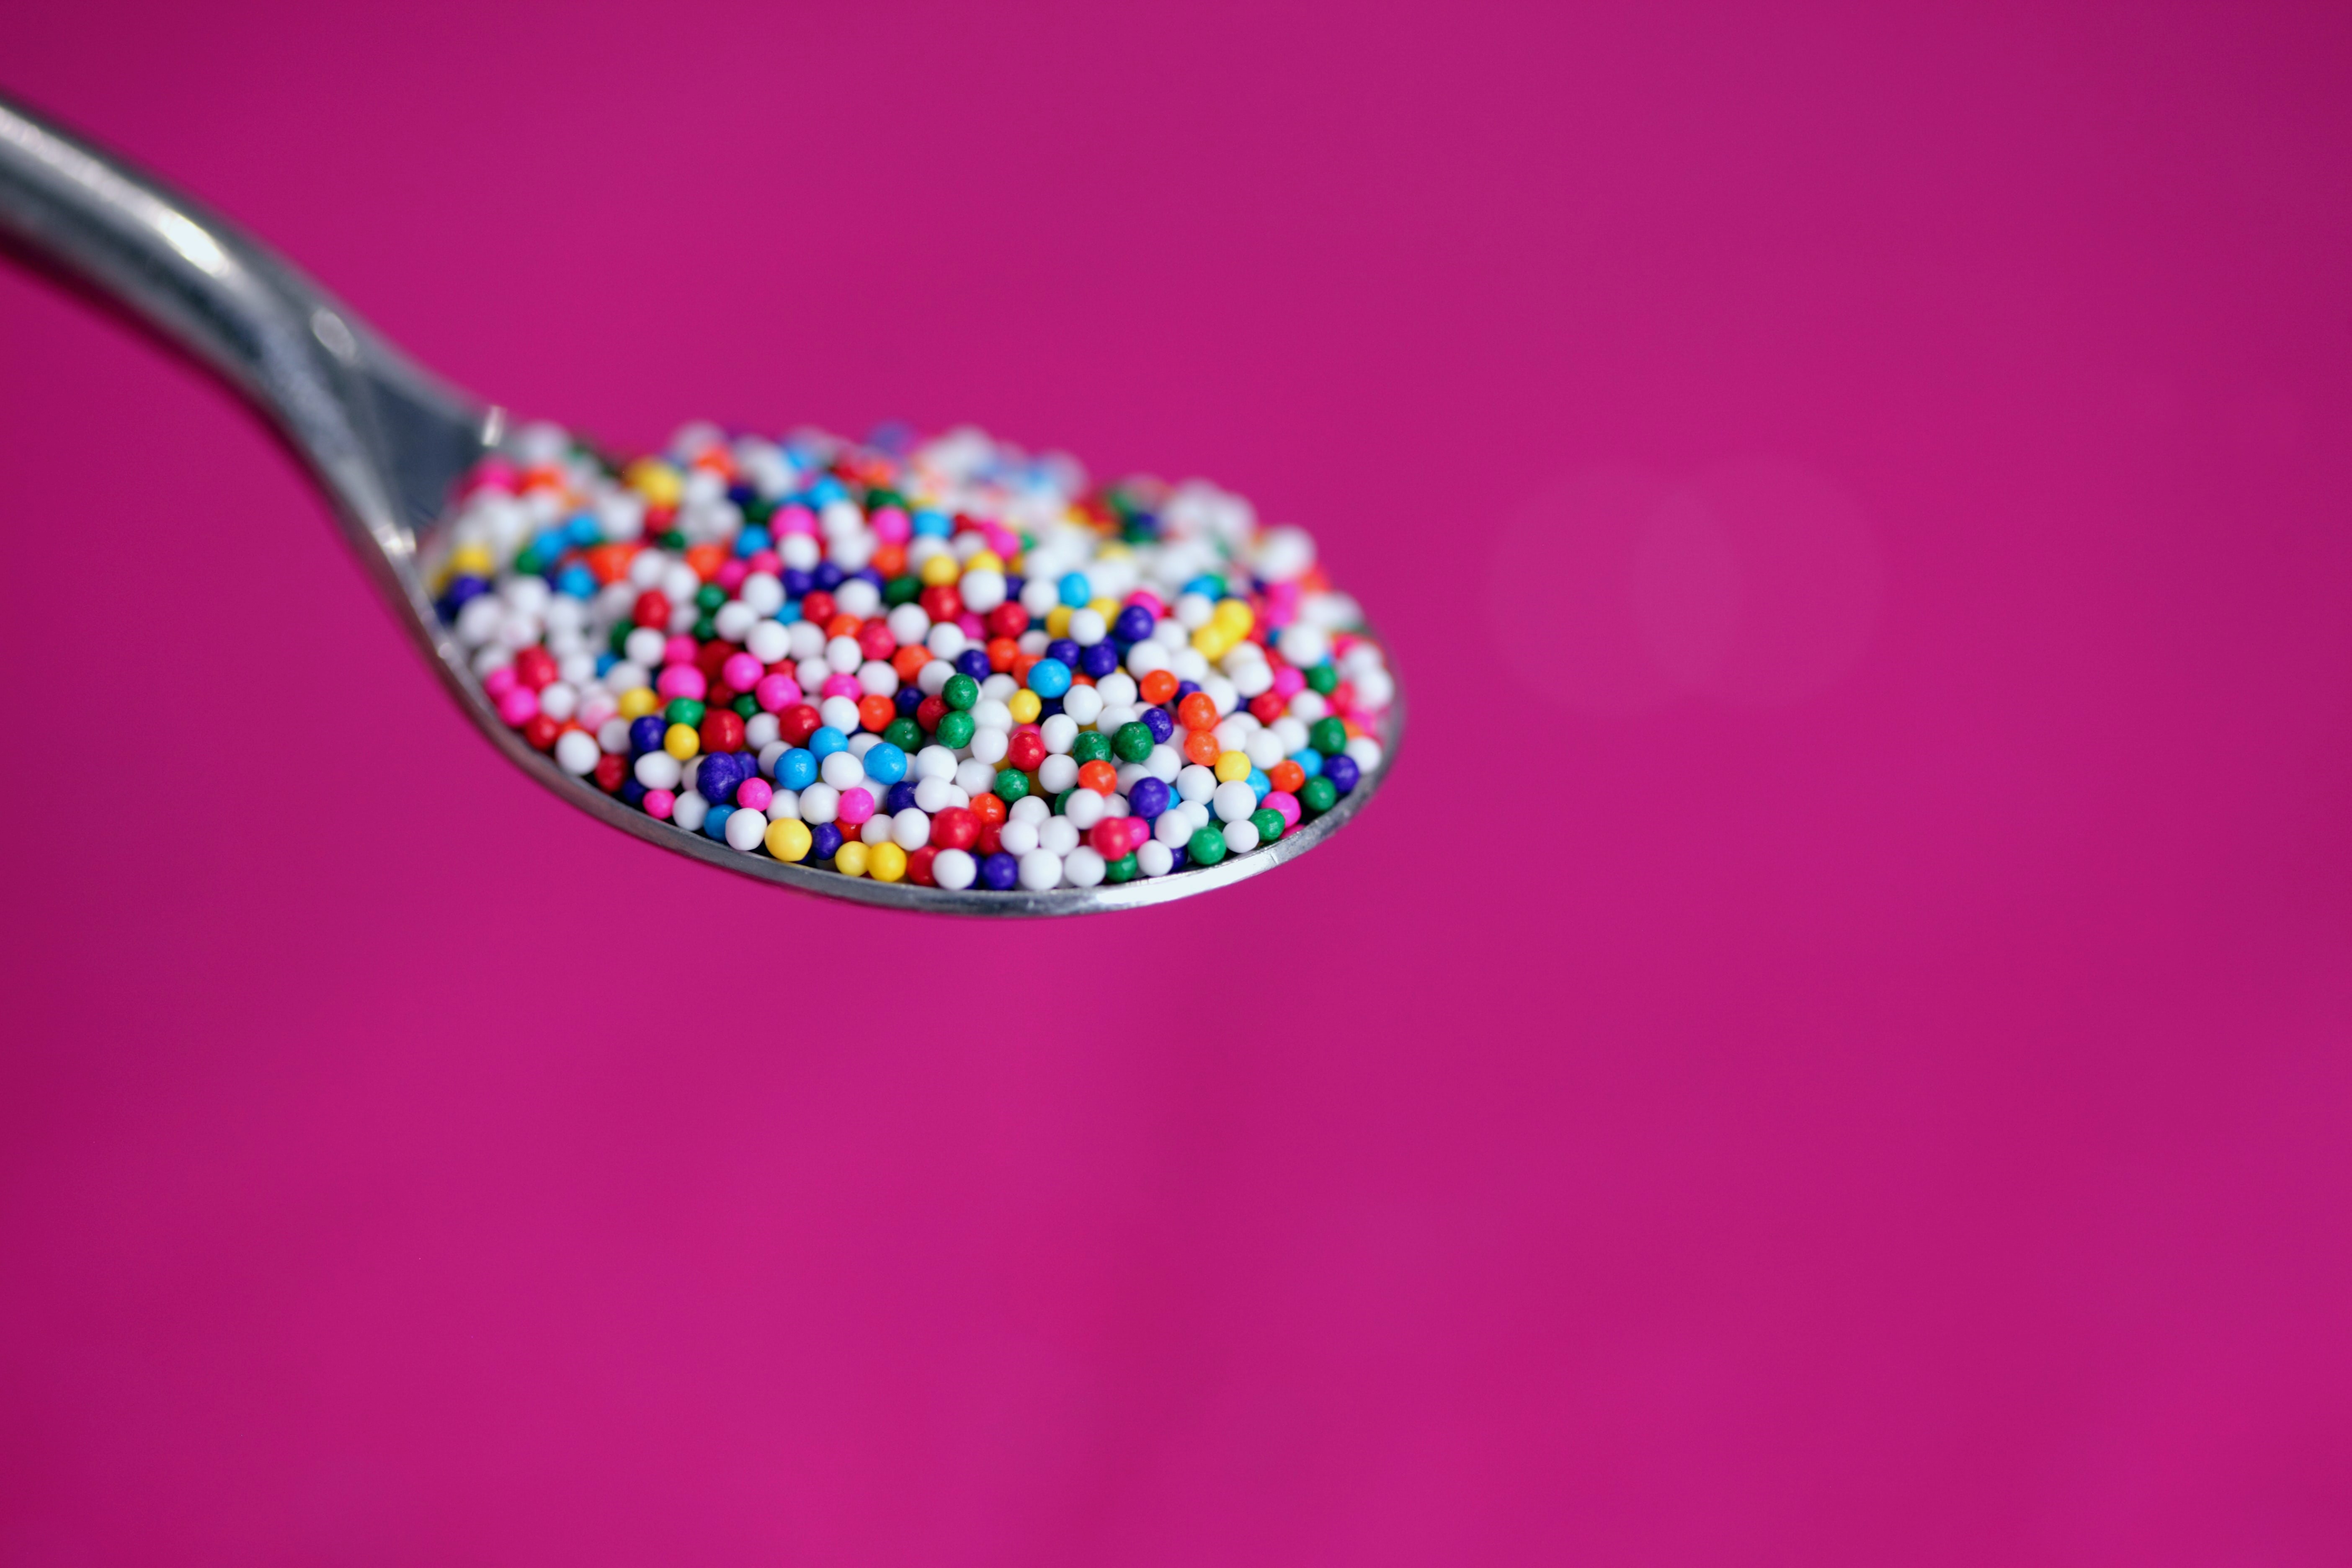 A spoonful of coloured sugar. Photo by Alexander Grey on Unsplash